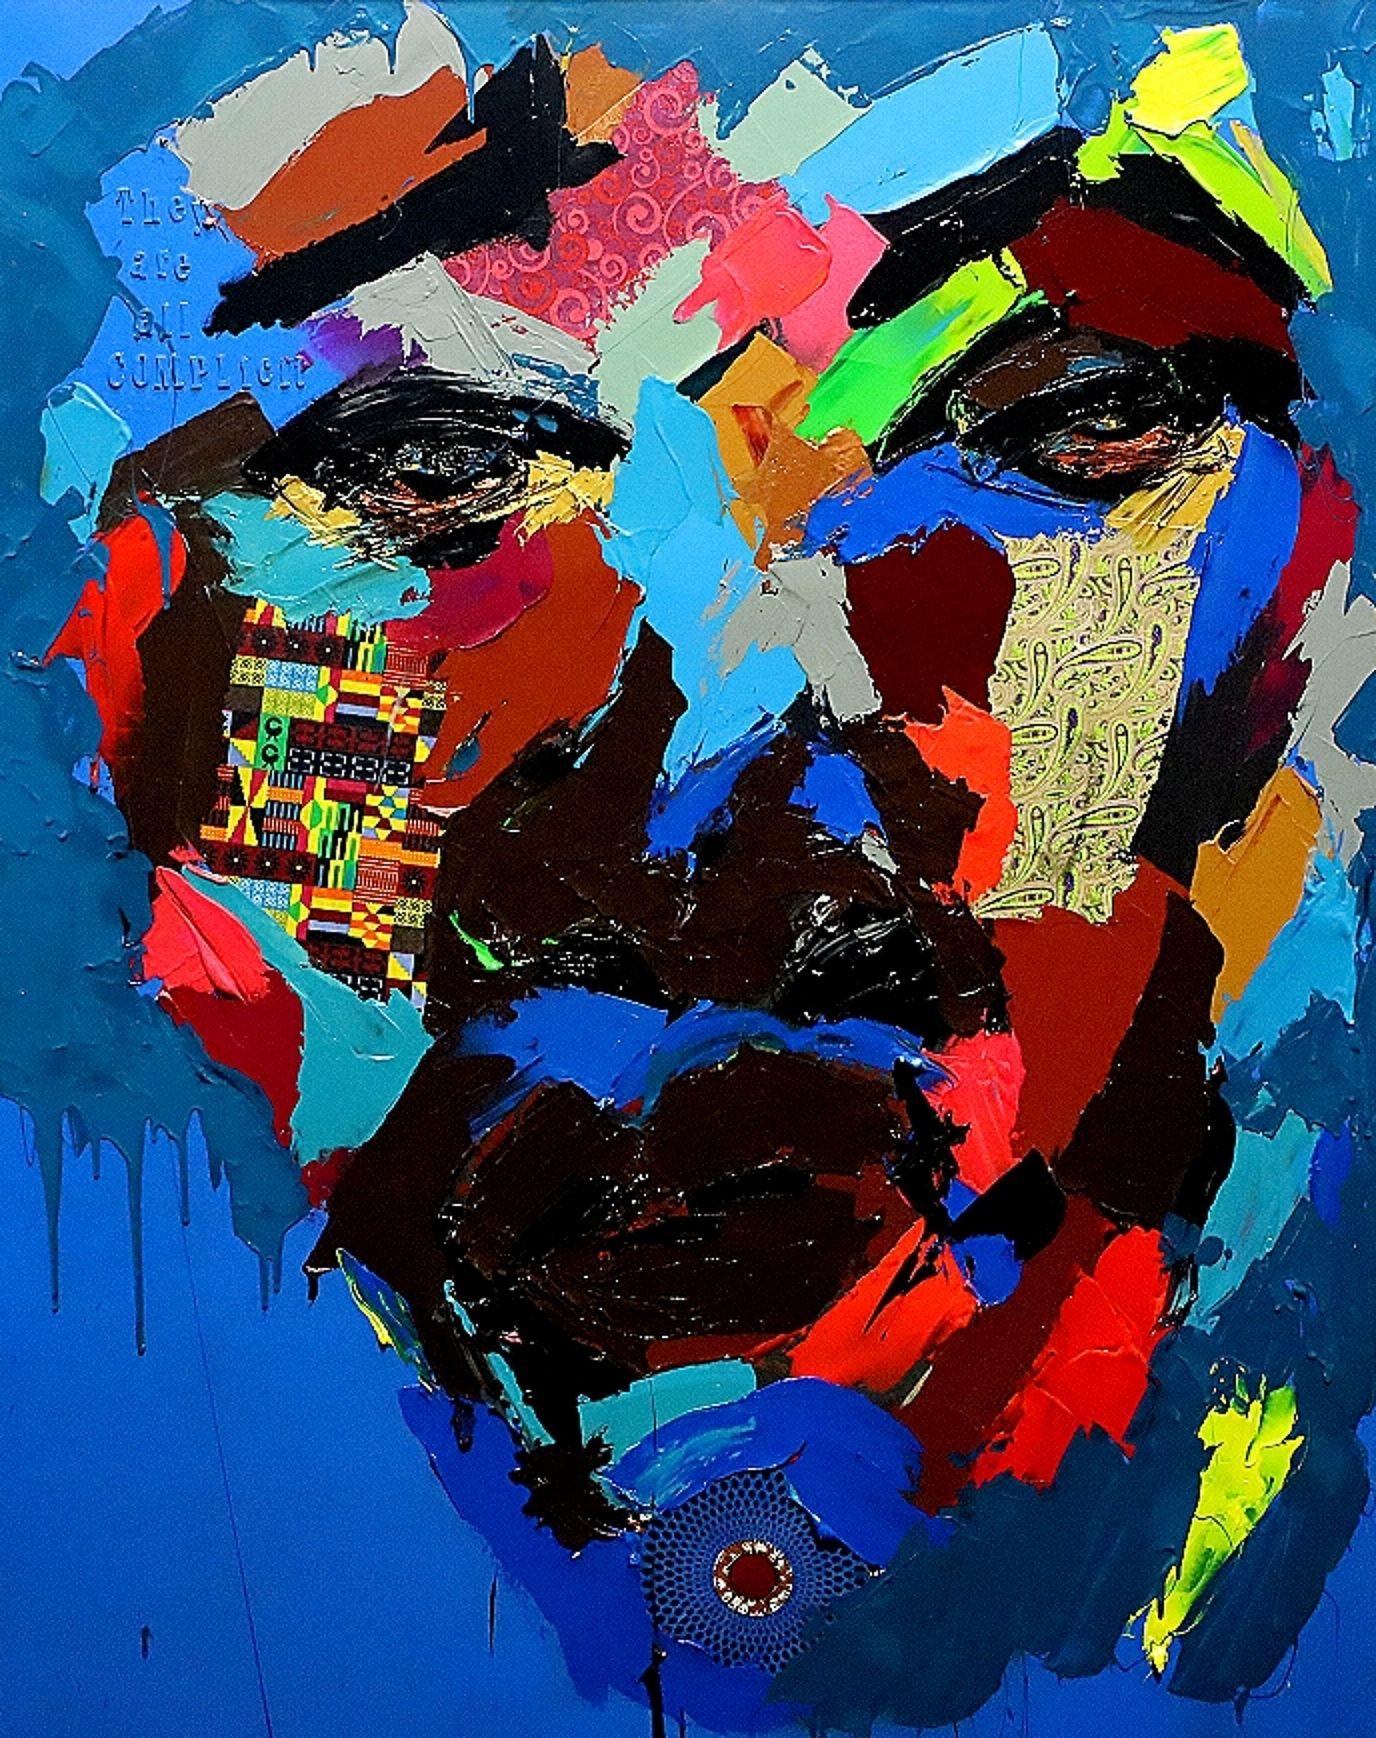 Untitled - Man of Color Series, Mixed Media on Canvas - Mixed Media Art by Harold Smith